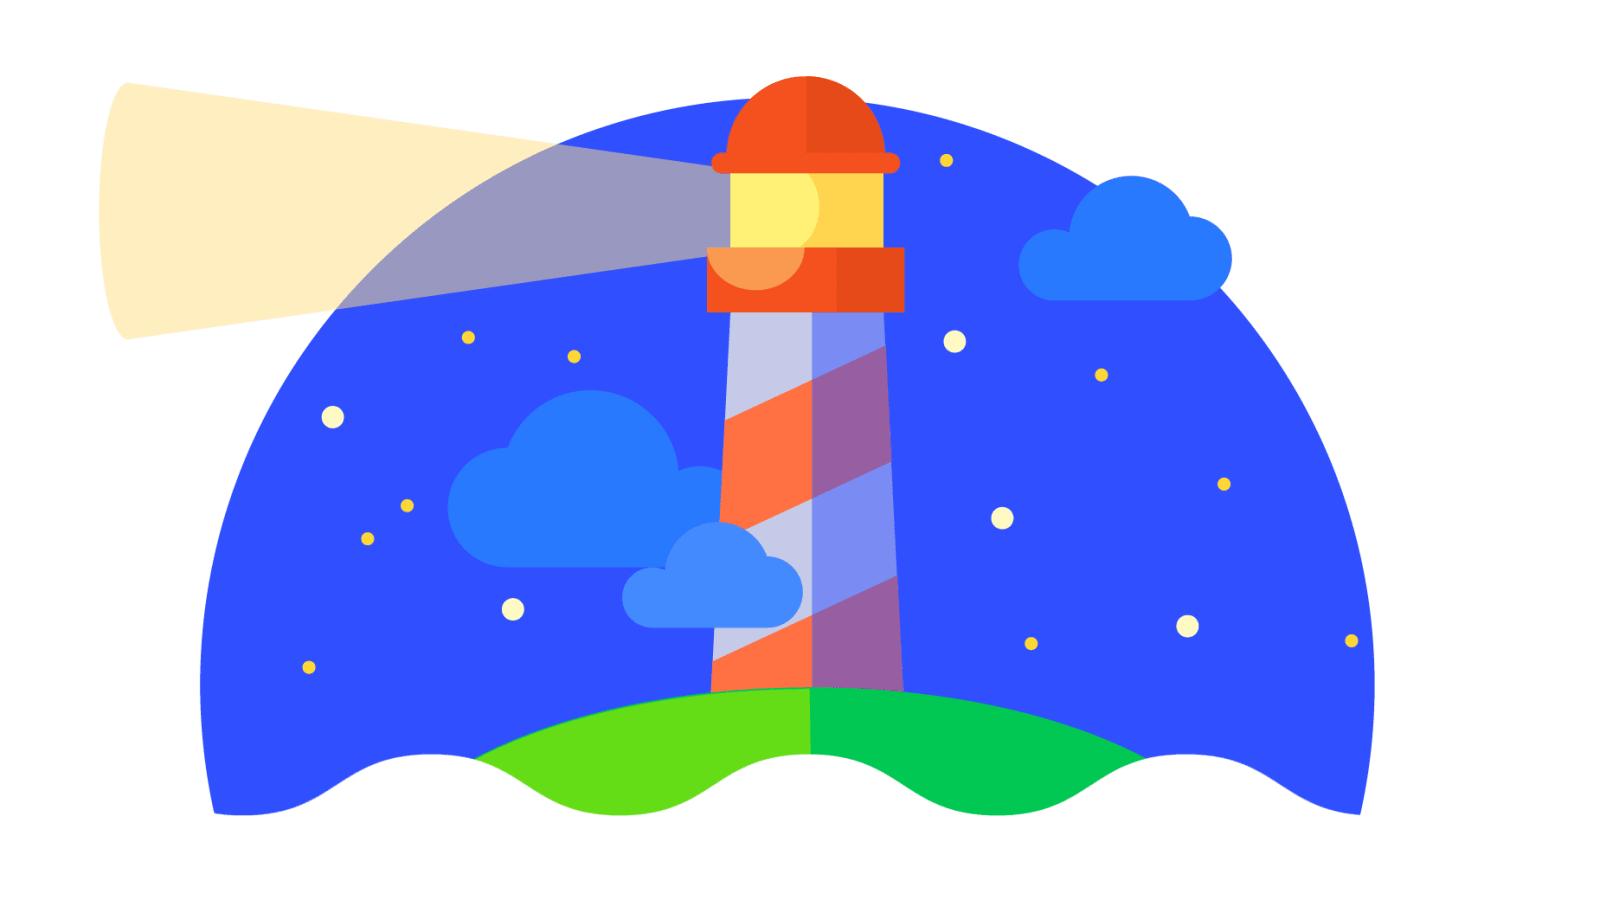 Google releases Lighthouse web dev extension for Firefox